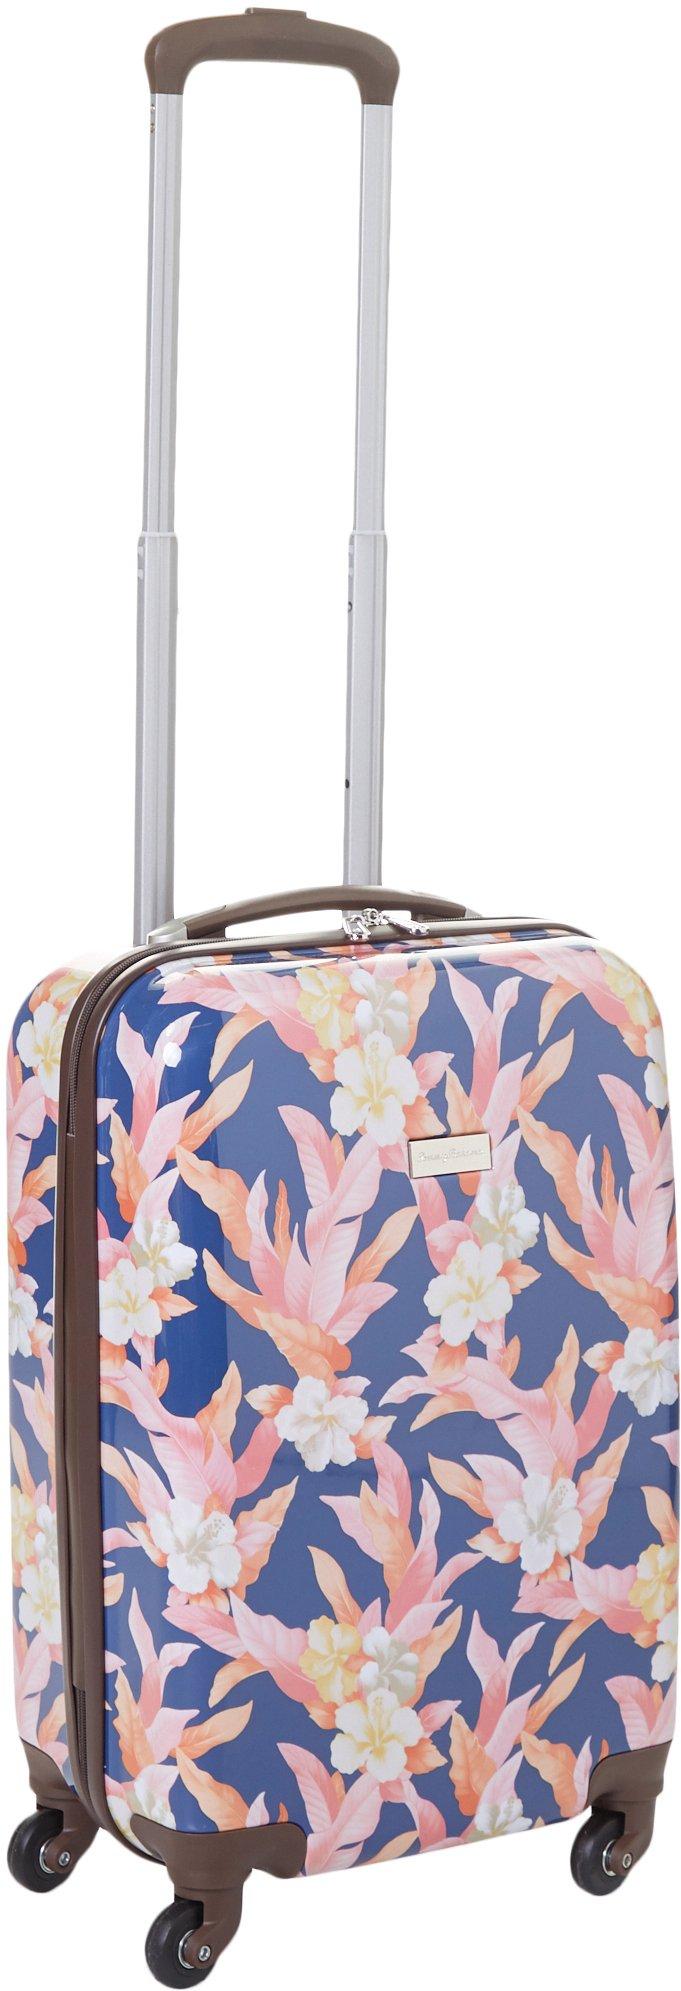 tommy bahama floral luggage